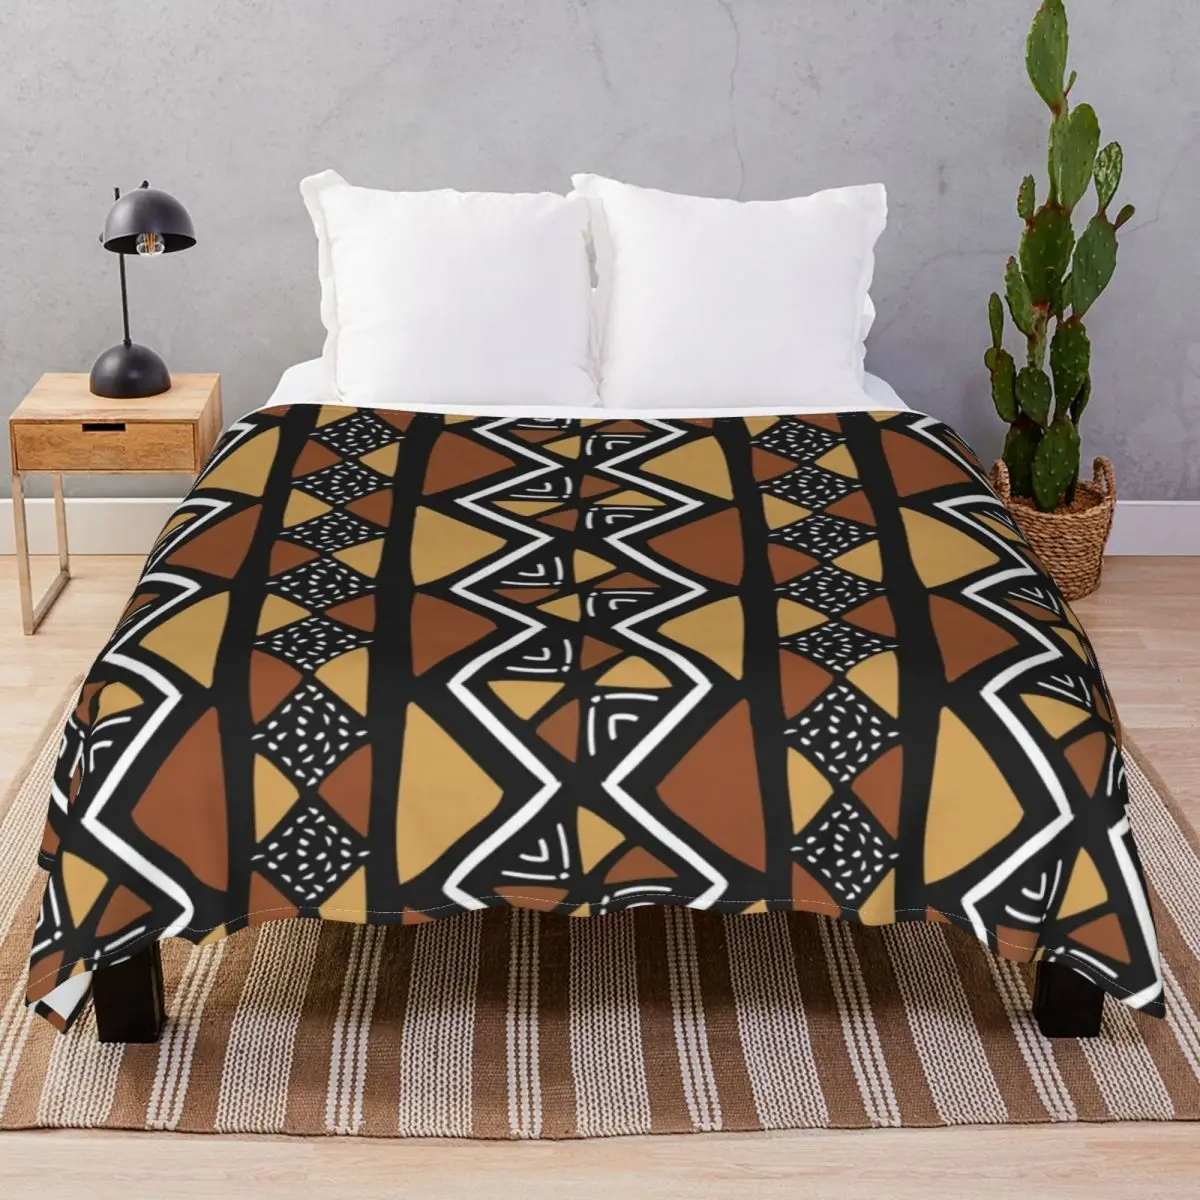 African Mud Cloth Mali Blanket Flannel Printed Fluffy Throw Blankets for Bed Home Couch Travel Office